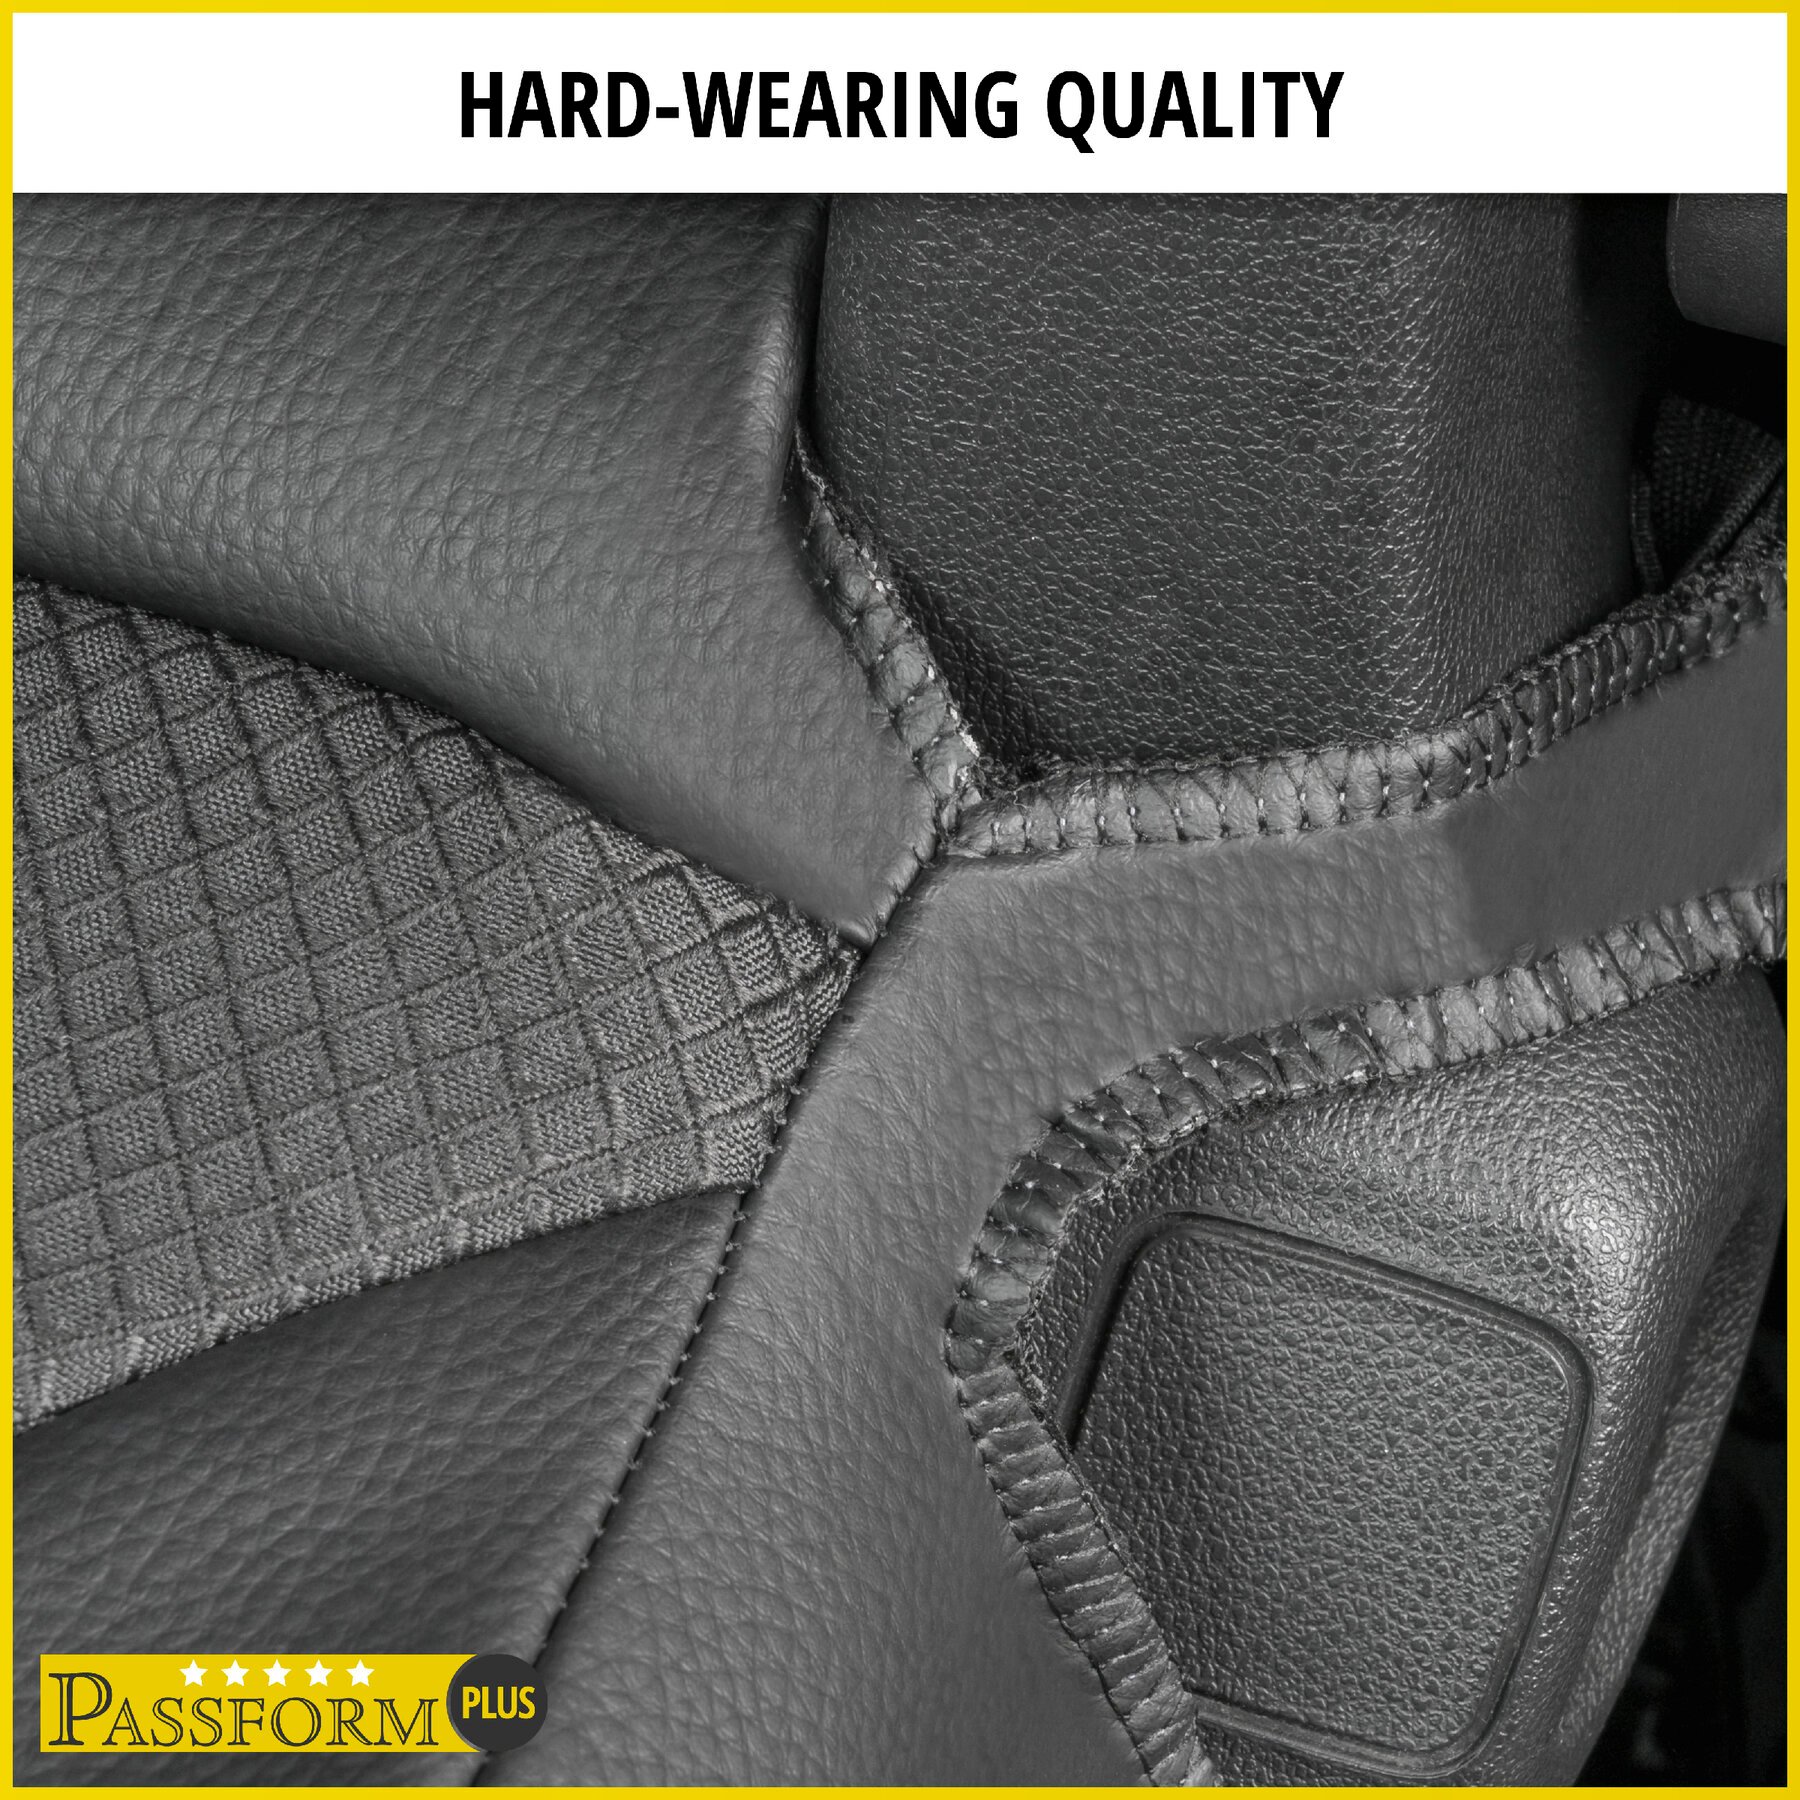 Premium Seat Cover for Citroen Jumper 04/2006-Today, 1 single seat cover front + armrest cover, 1 double bench cover